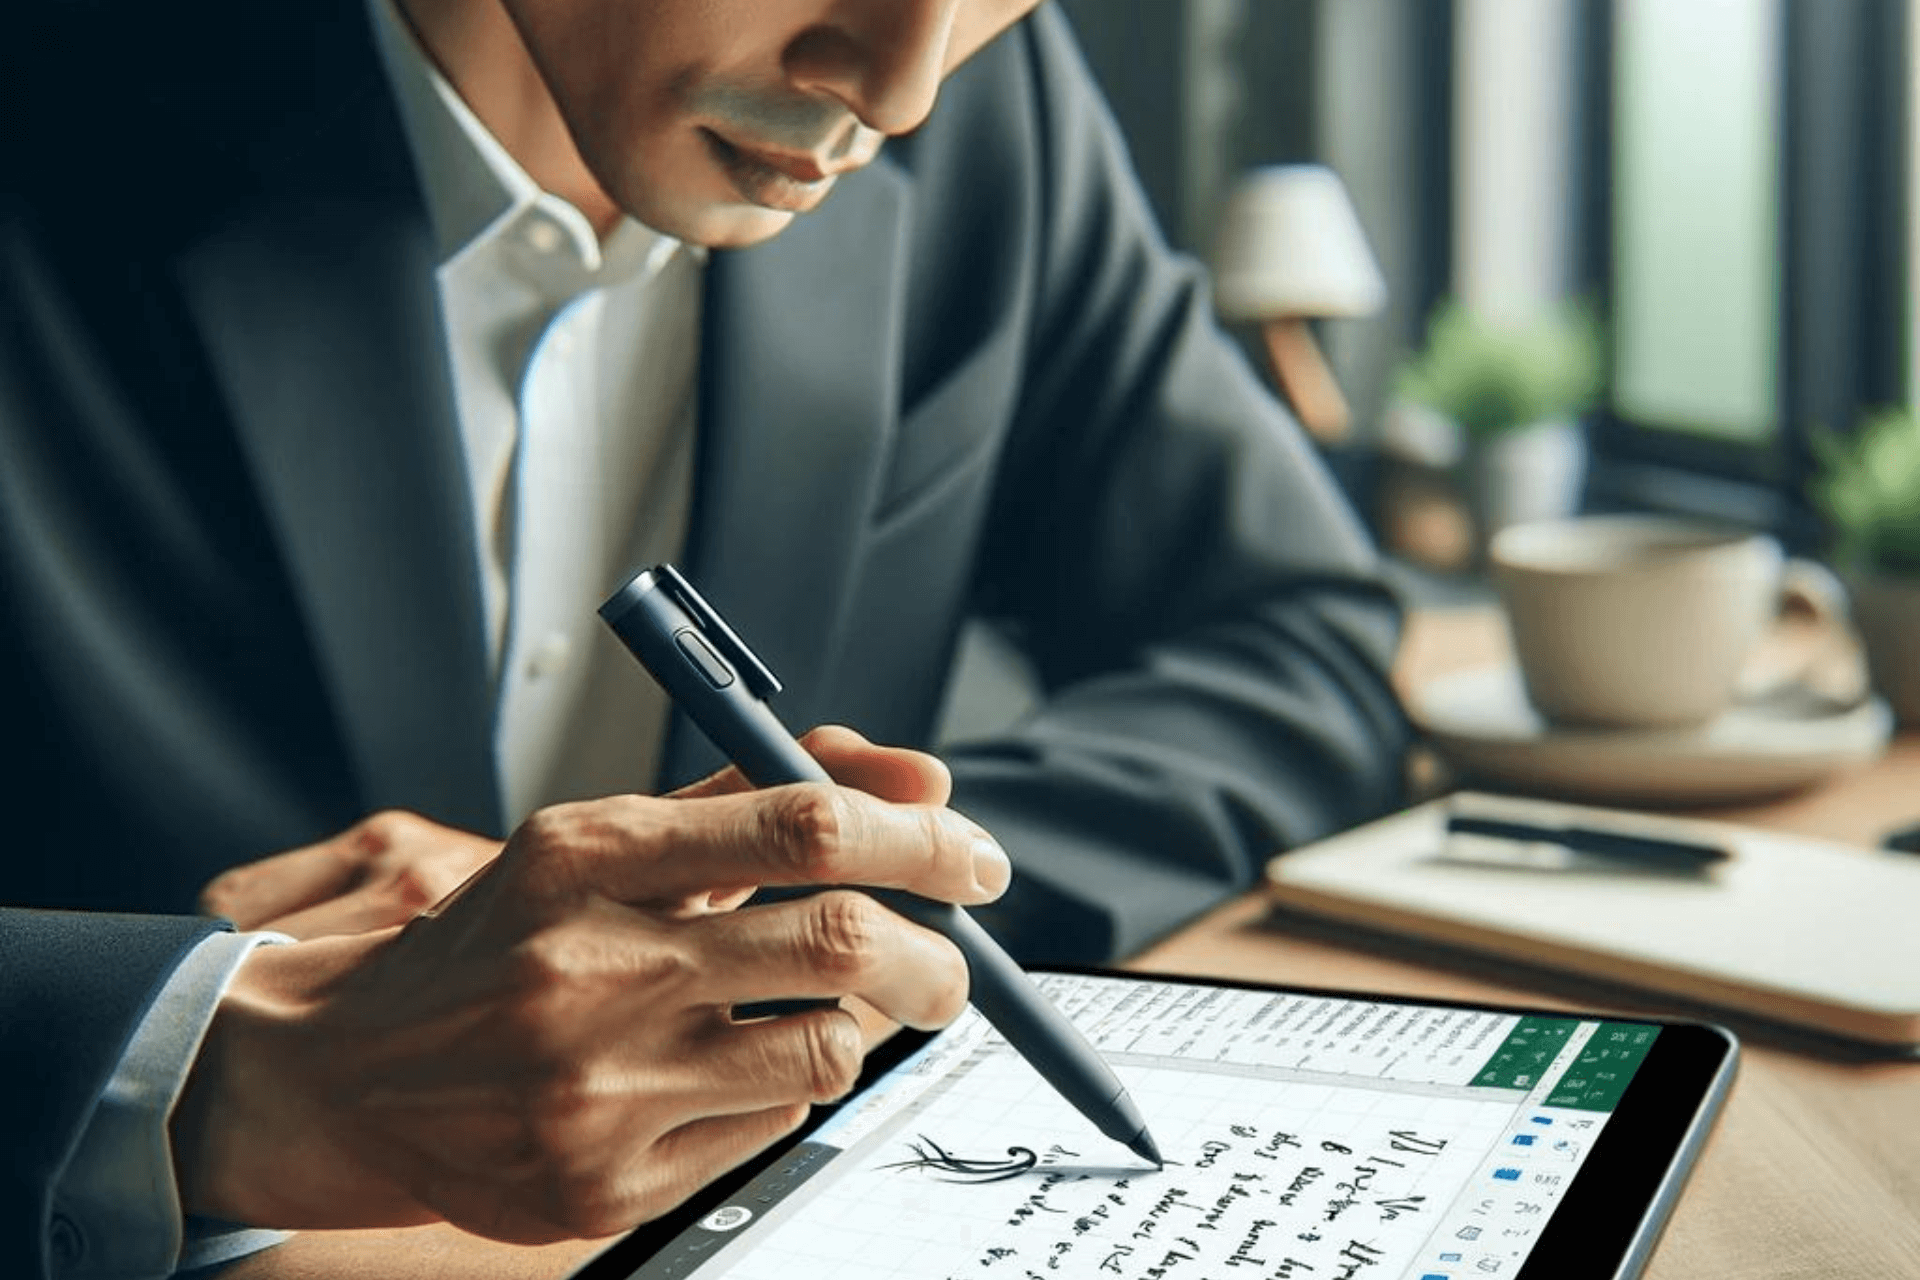 Microsoft 365 Insiders can now convert their handwriting into text on Excel